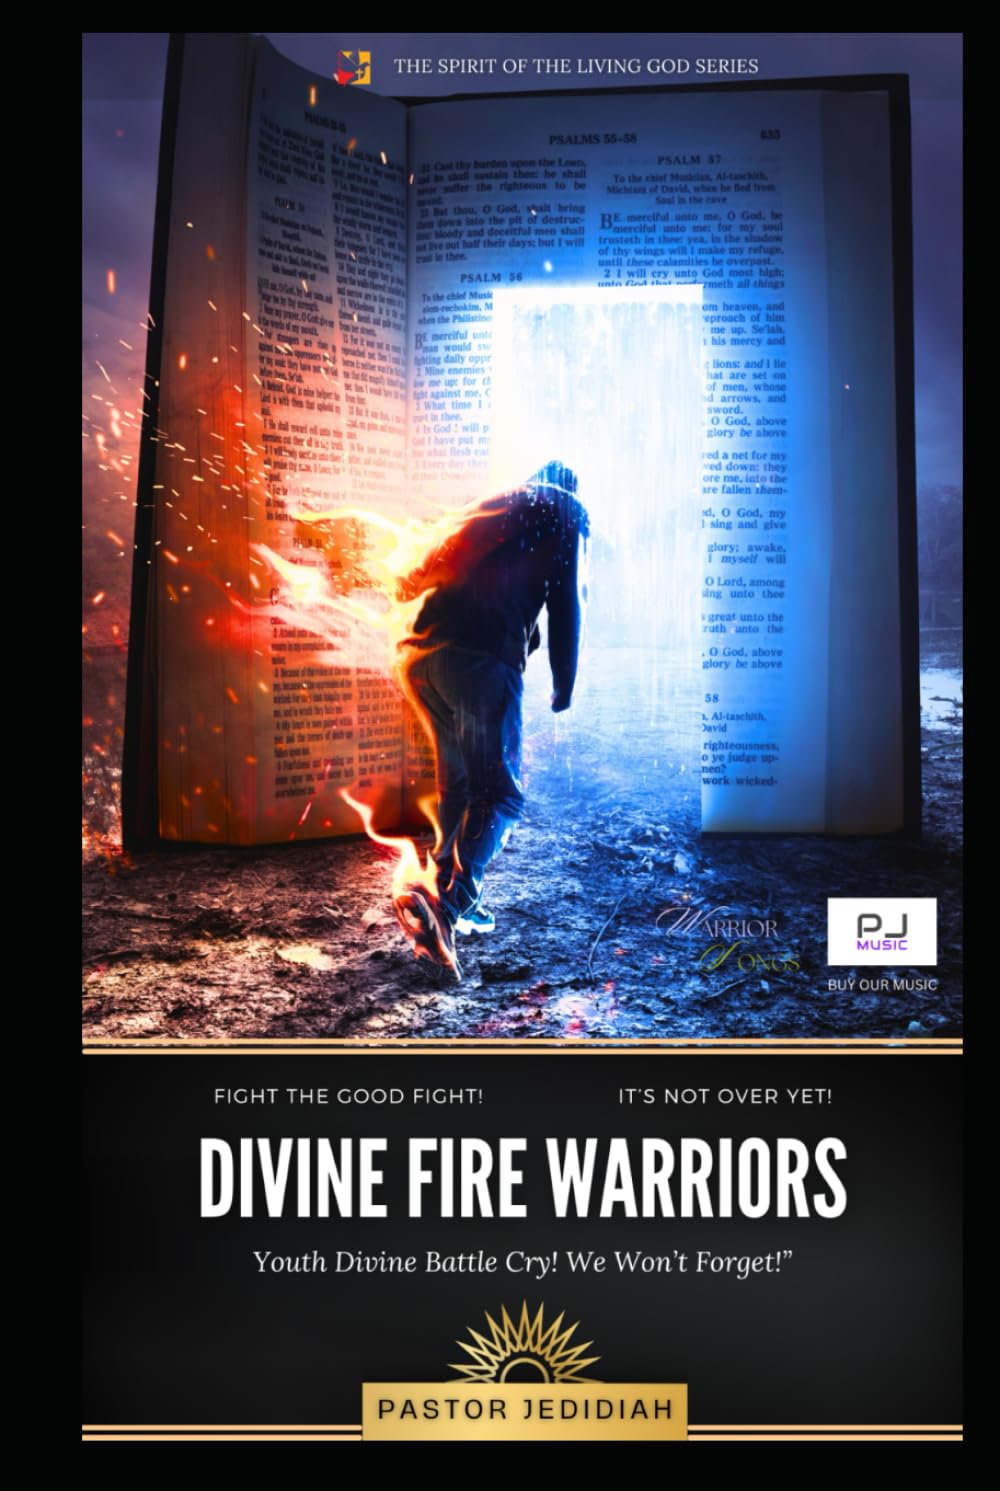 Divine Fire Warriors: How To Fight The Good Fight! It's Not Over Yet! (The Spirit Of The Living God Series)